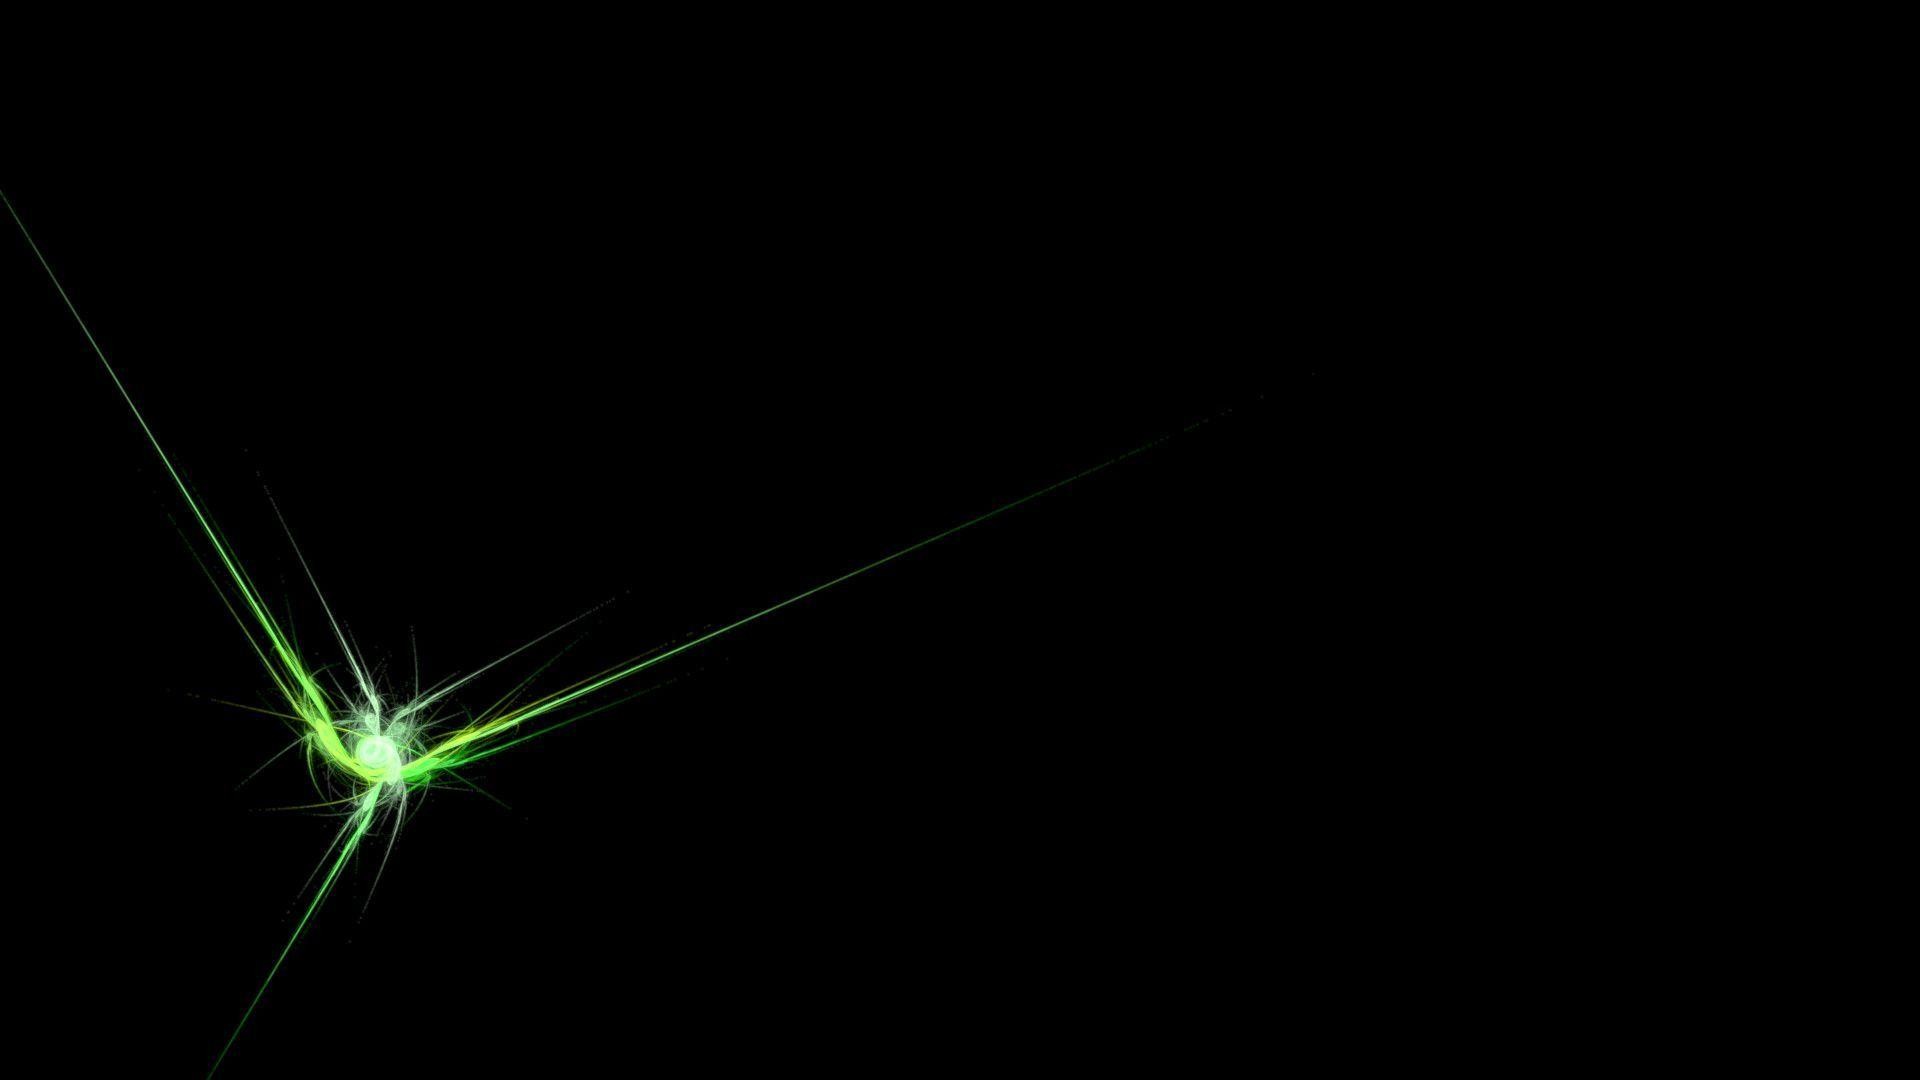 1920x1080 Wallpapers For > Lime Green And Black Backgrounds